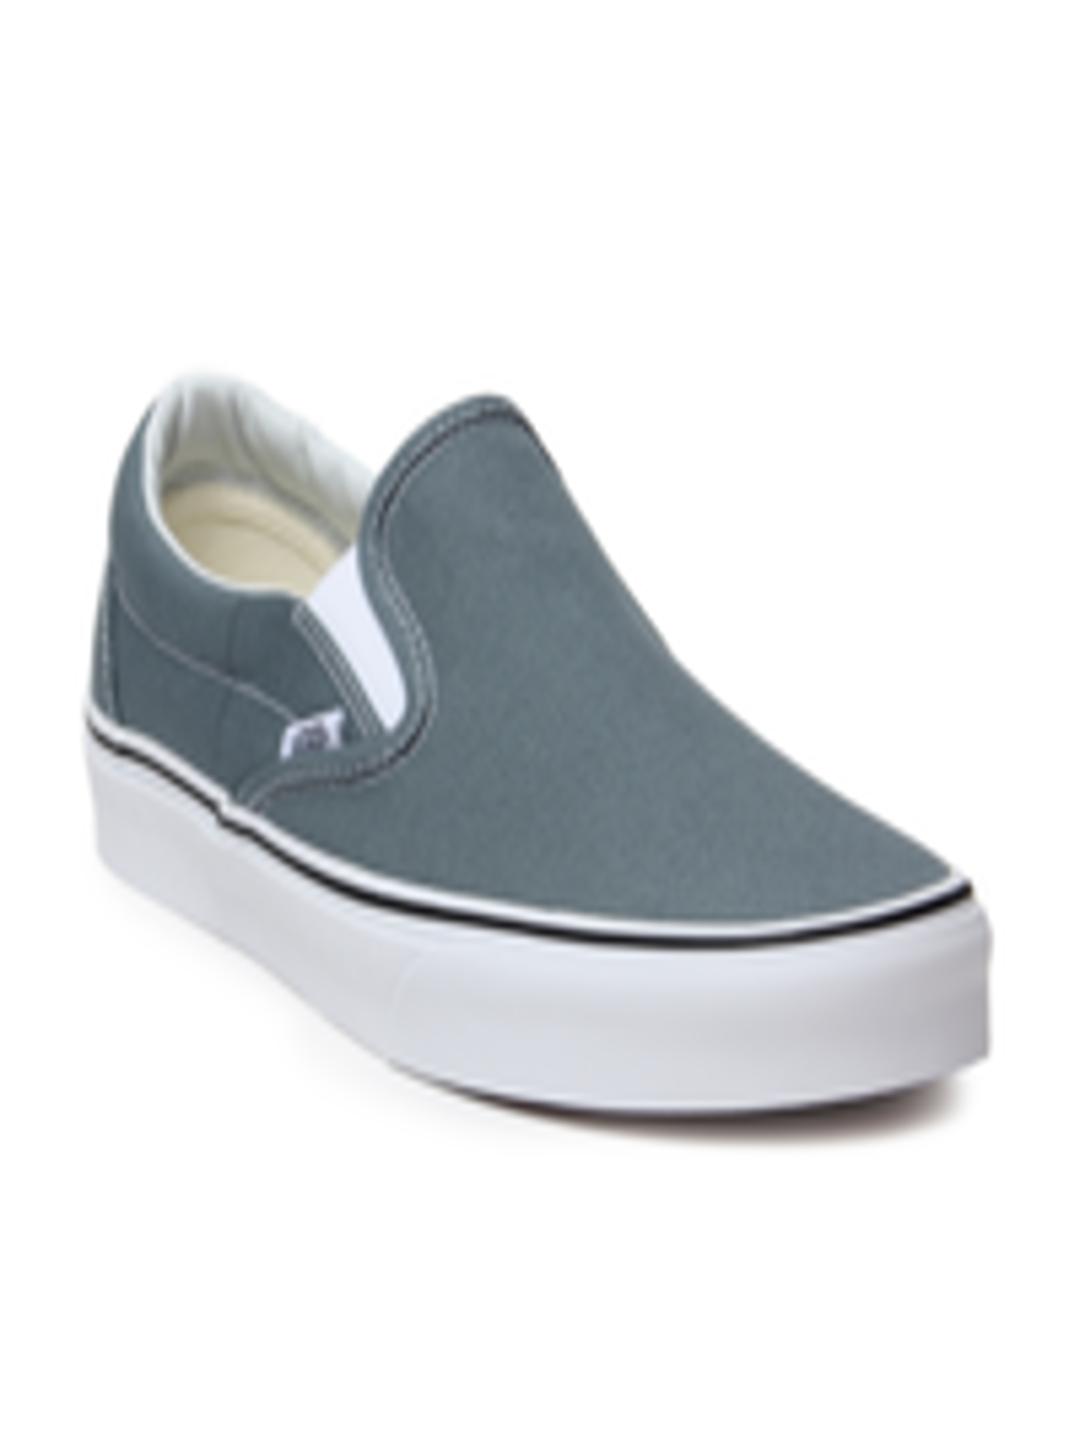 Buy Vans Unisex Blue Classic Slip On Sneakers - Casual Shoes for Unisex